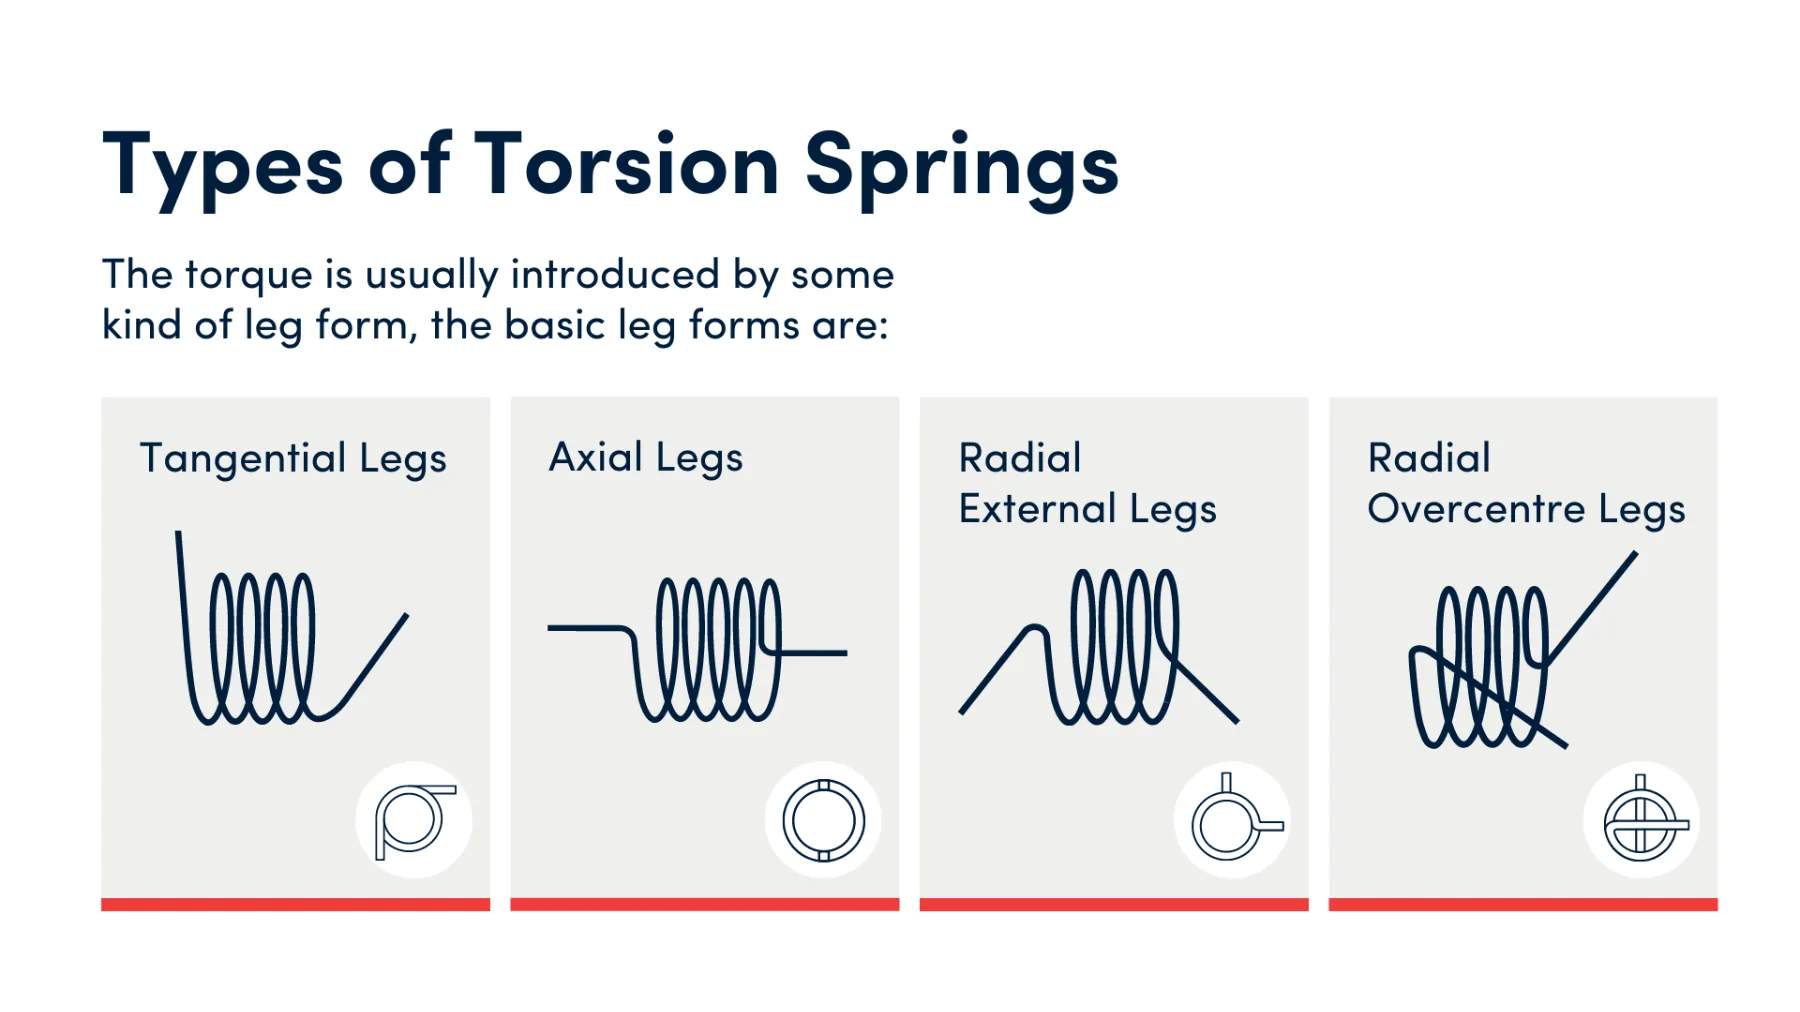 Torsion Springs: Types, Uses, Features and Benefits